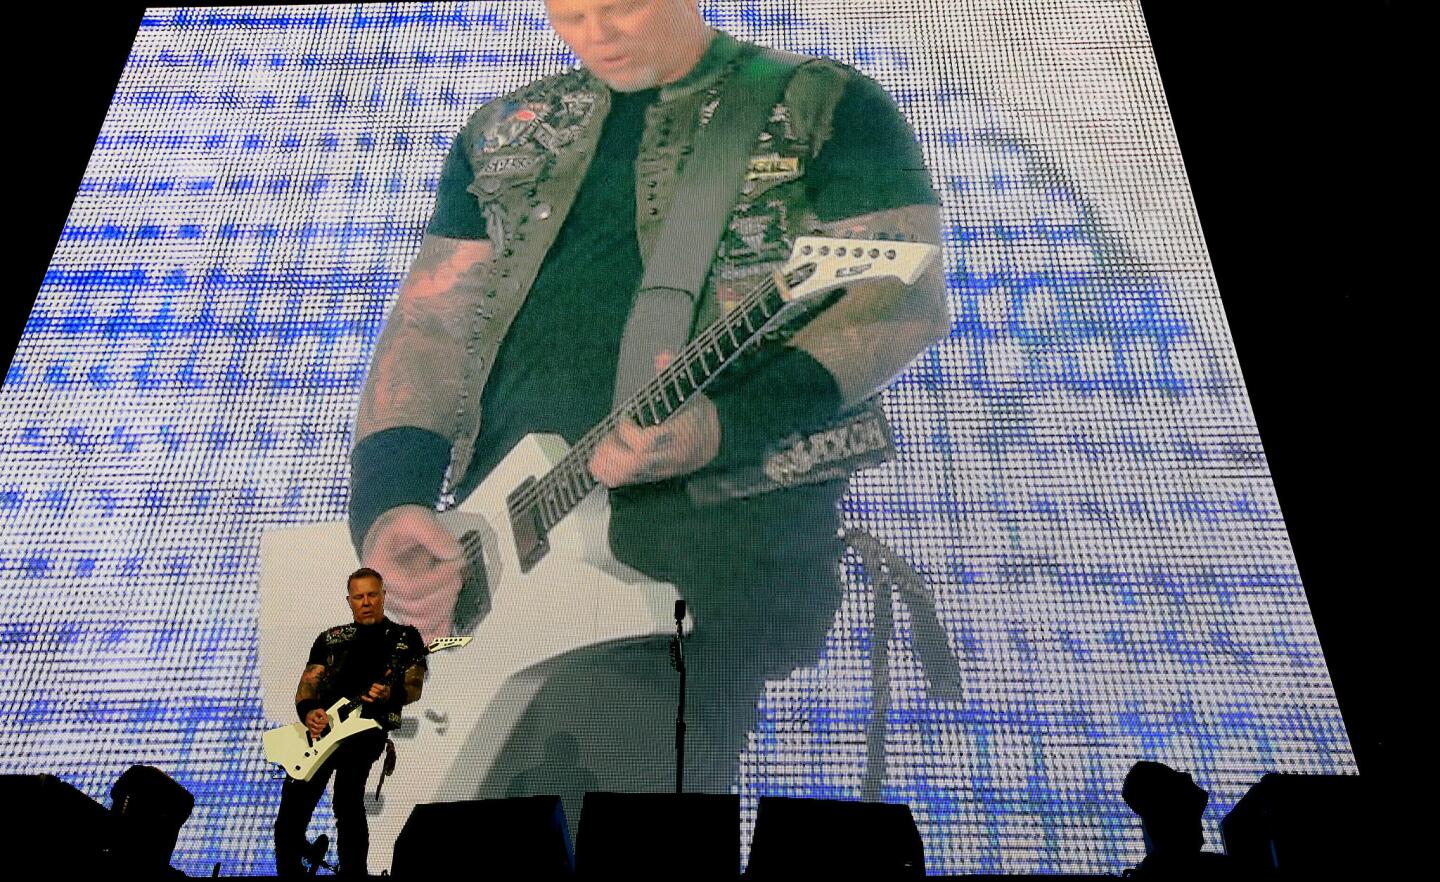 James Hetfield of Metallica on guitar fills up the large screen and the stage. He serenaded newlyweds with "Master of Puppets."